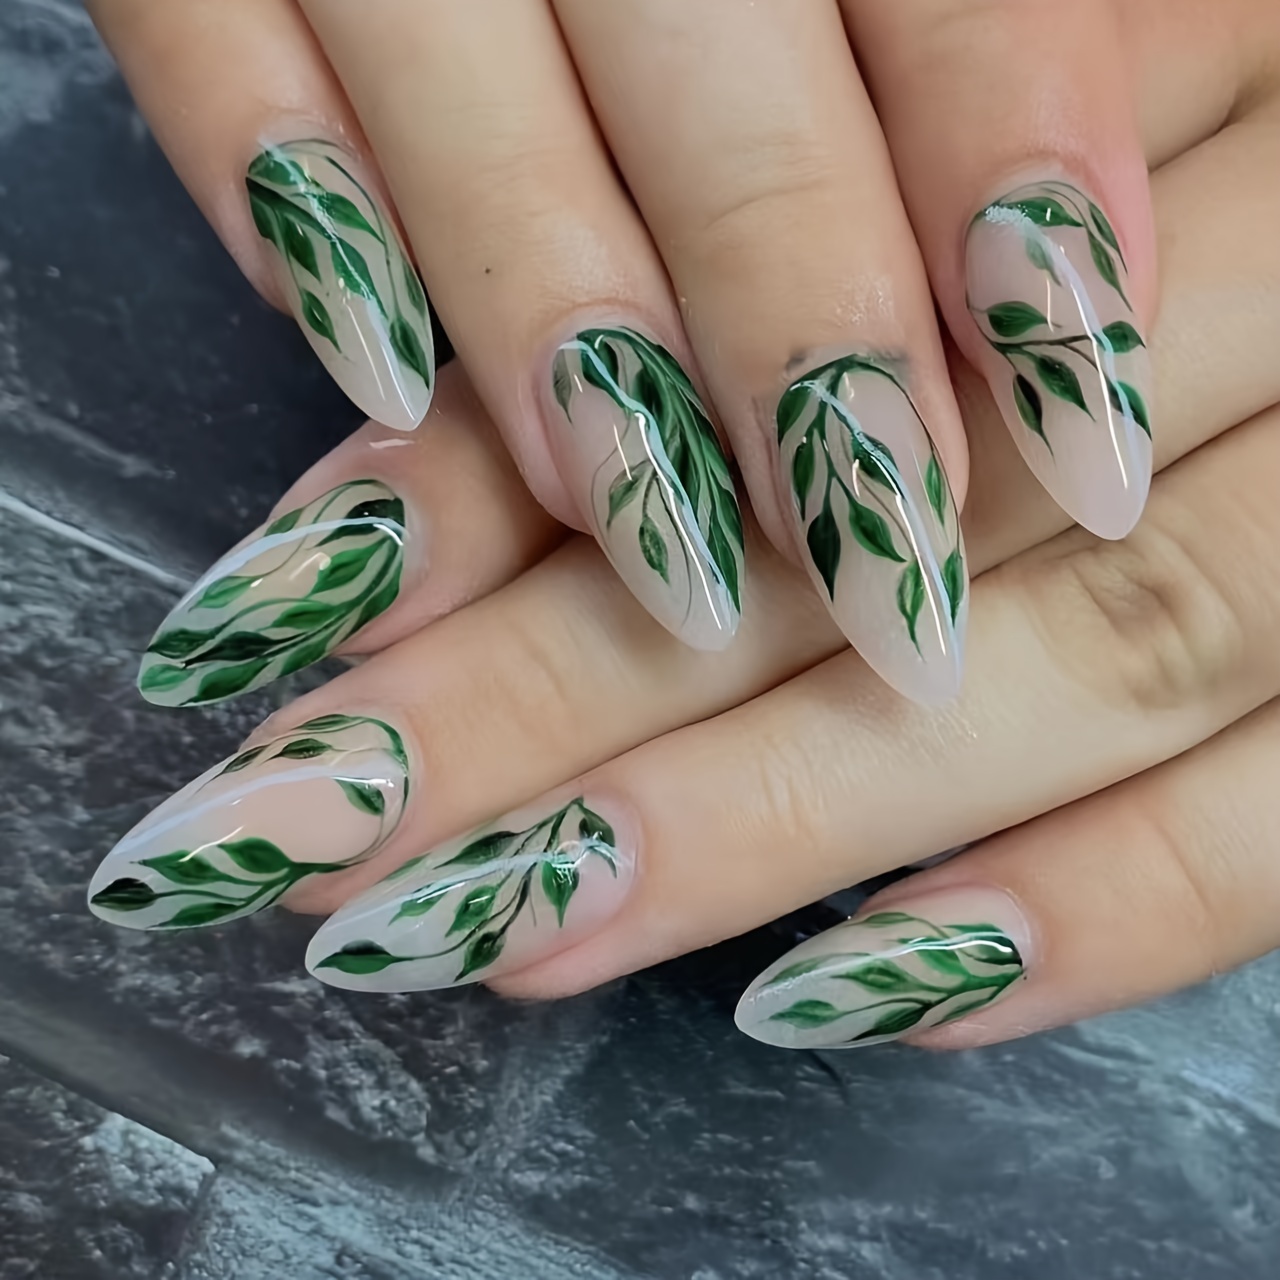 

24pcs Almond-shaped Medium-long Wearable Green Leaf Pattern Press-on Fake Nails, Removable Artificial Nail Tips Set With Glue - Elegant Nature-inspired Design For Effortless Nail Art